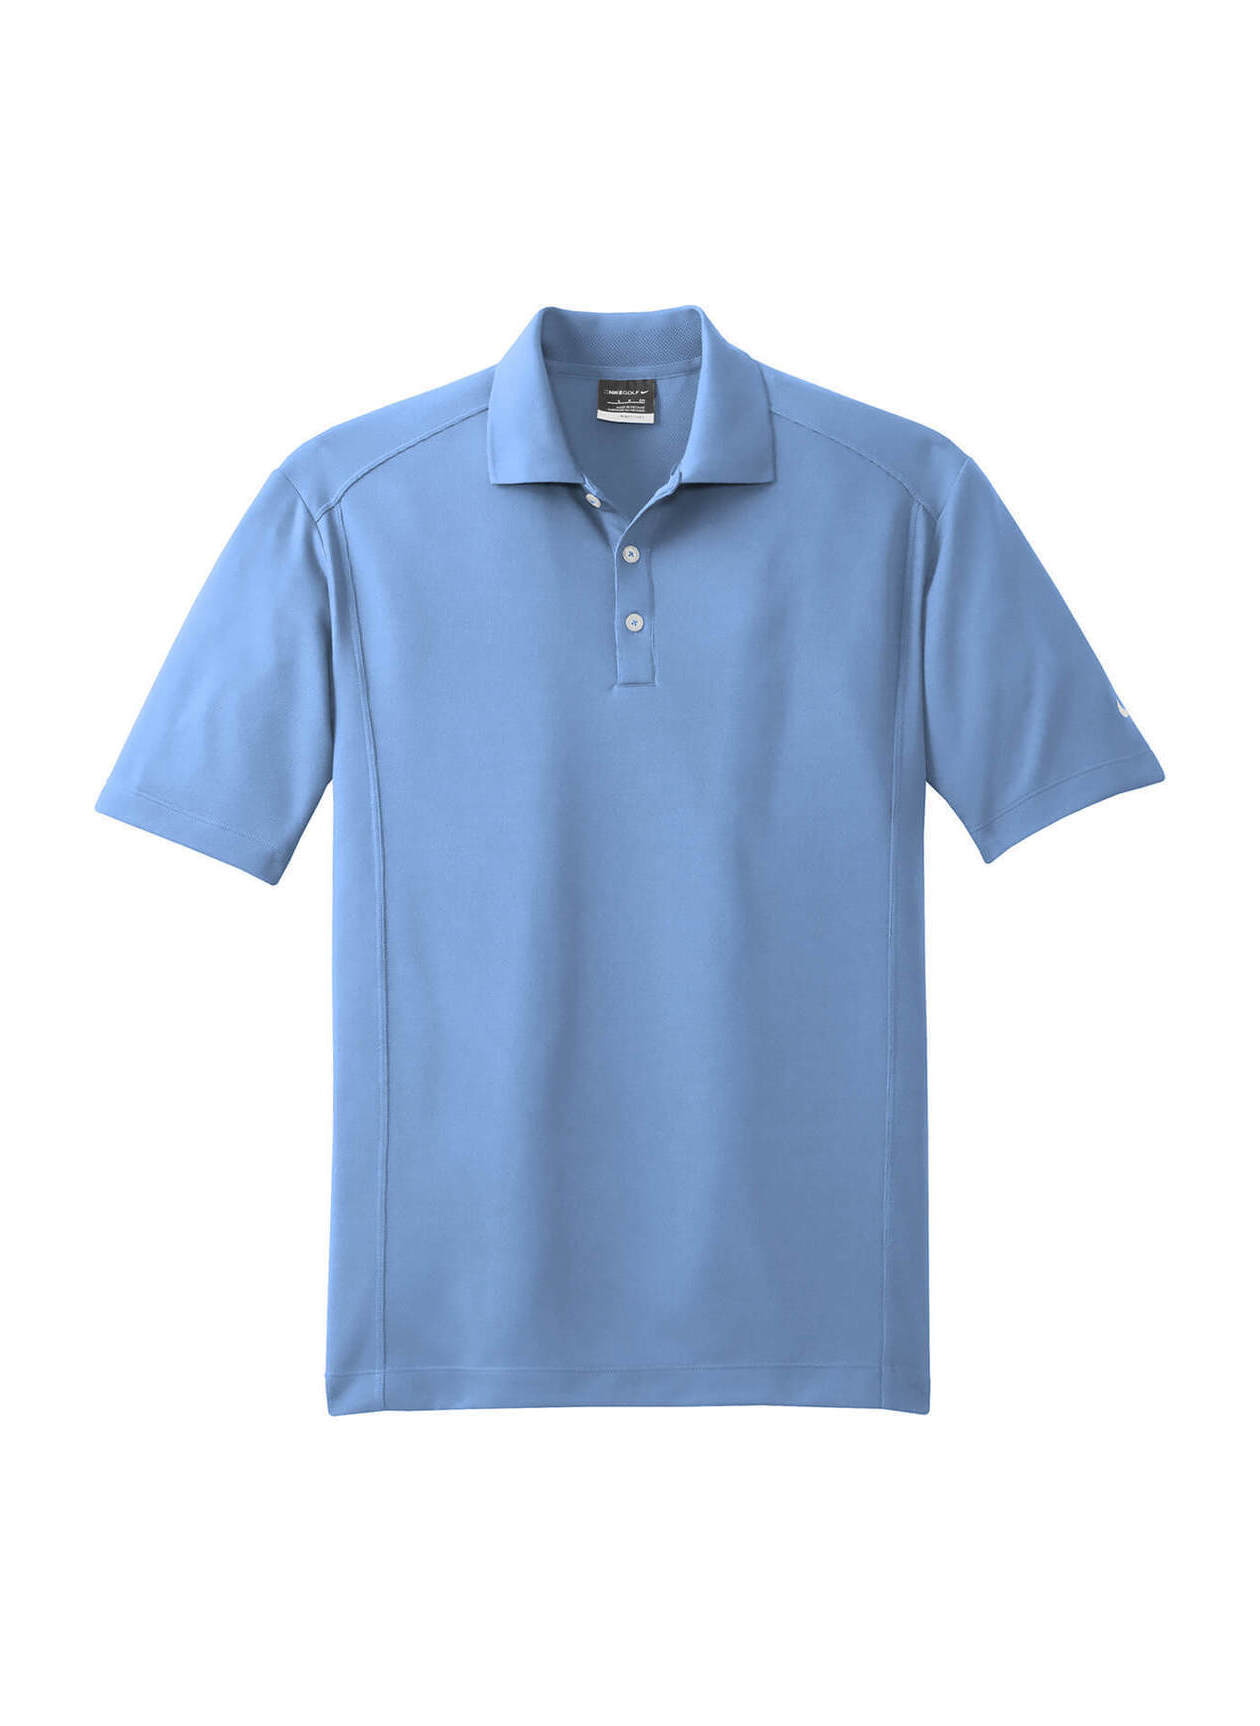 Top Classic Polo T Shirt Retailers in Pune - Best Classic Polo T Shirt  Retailers - Justdial